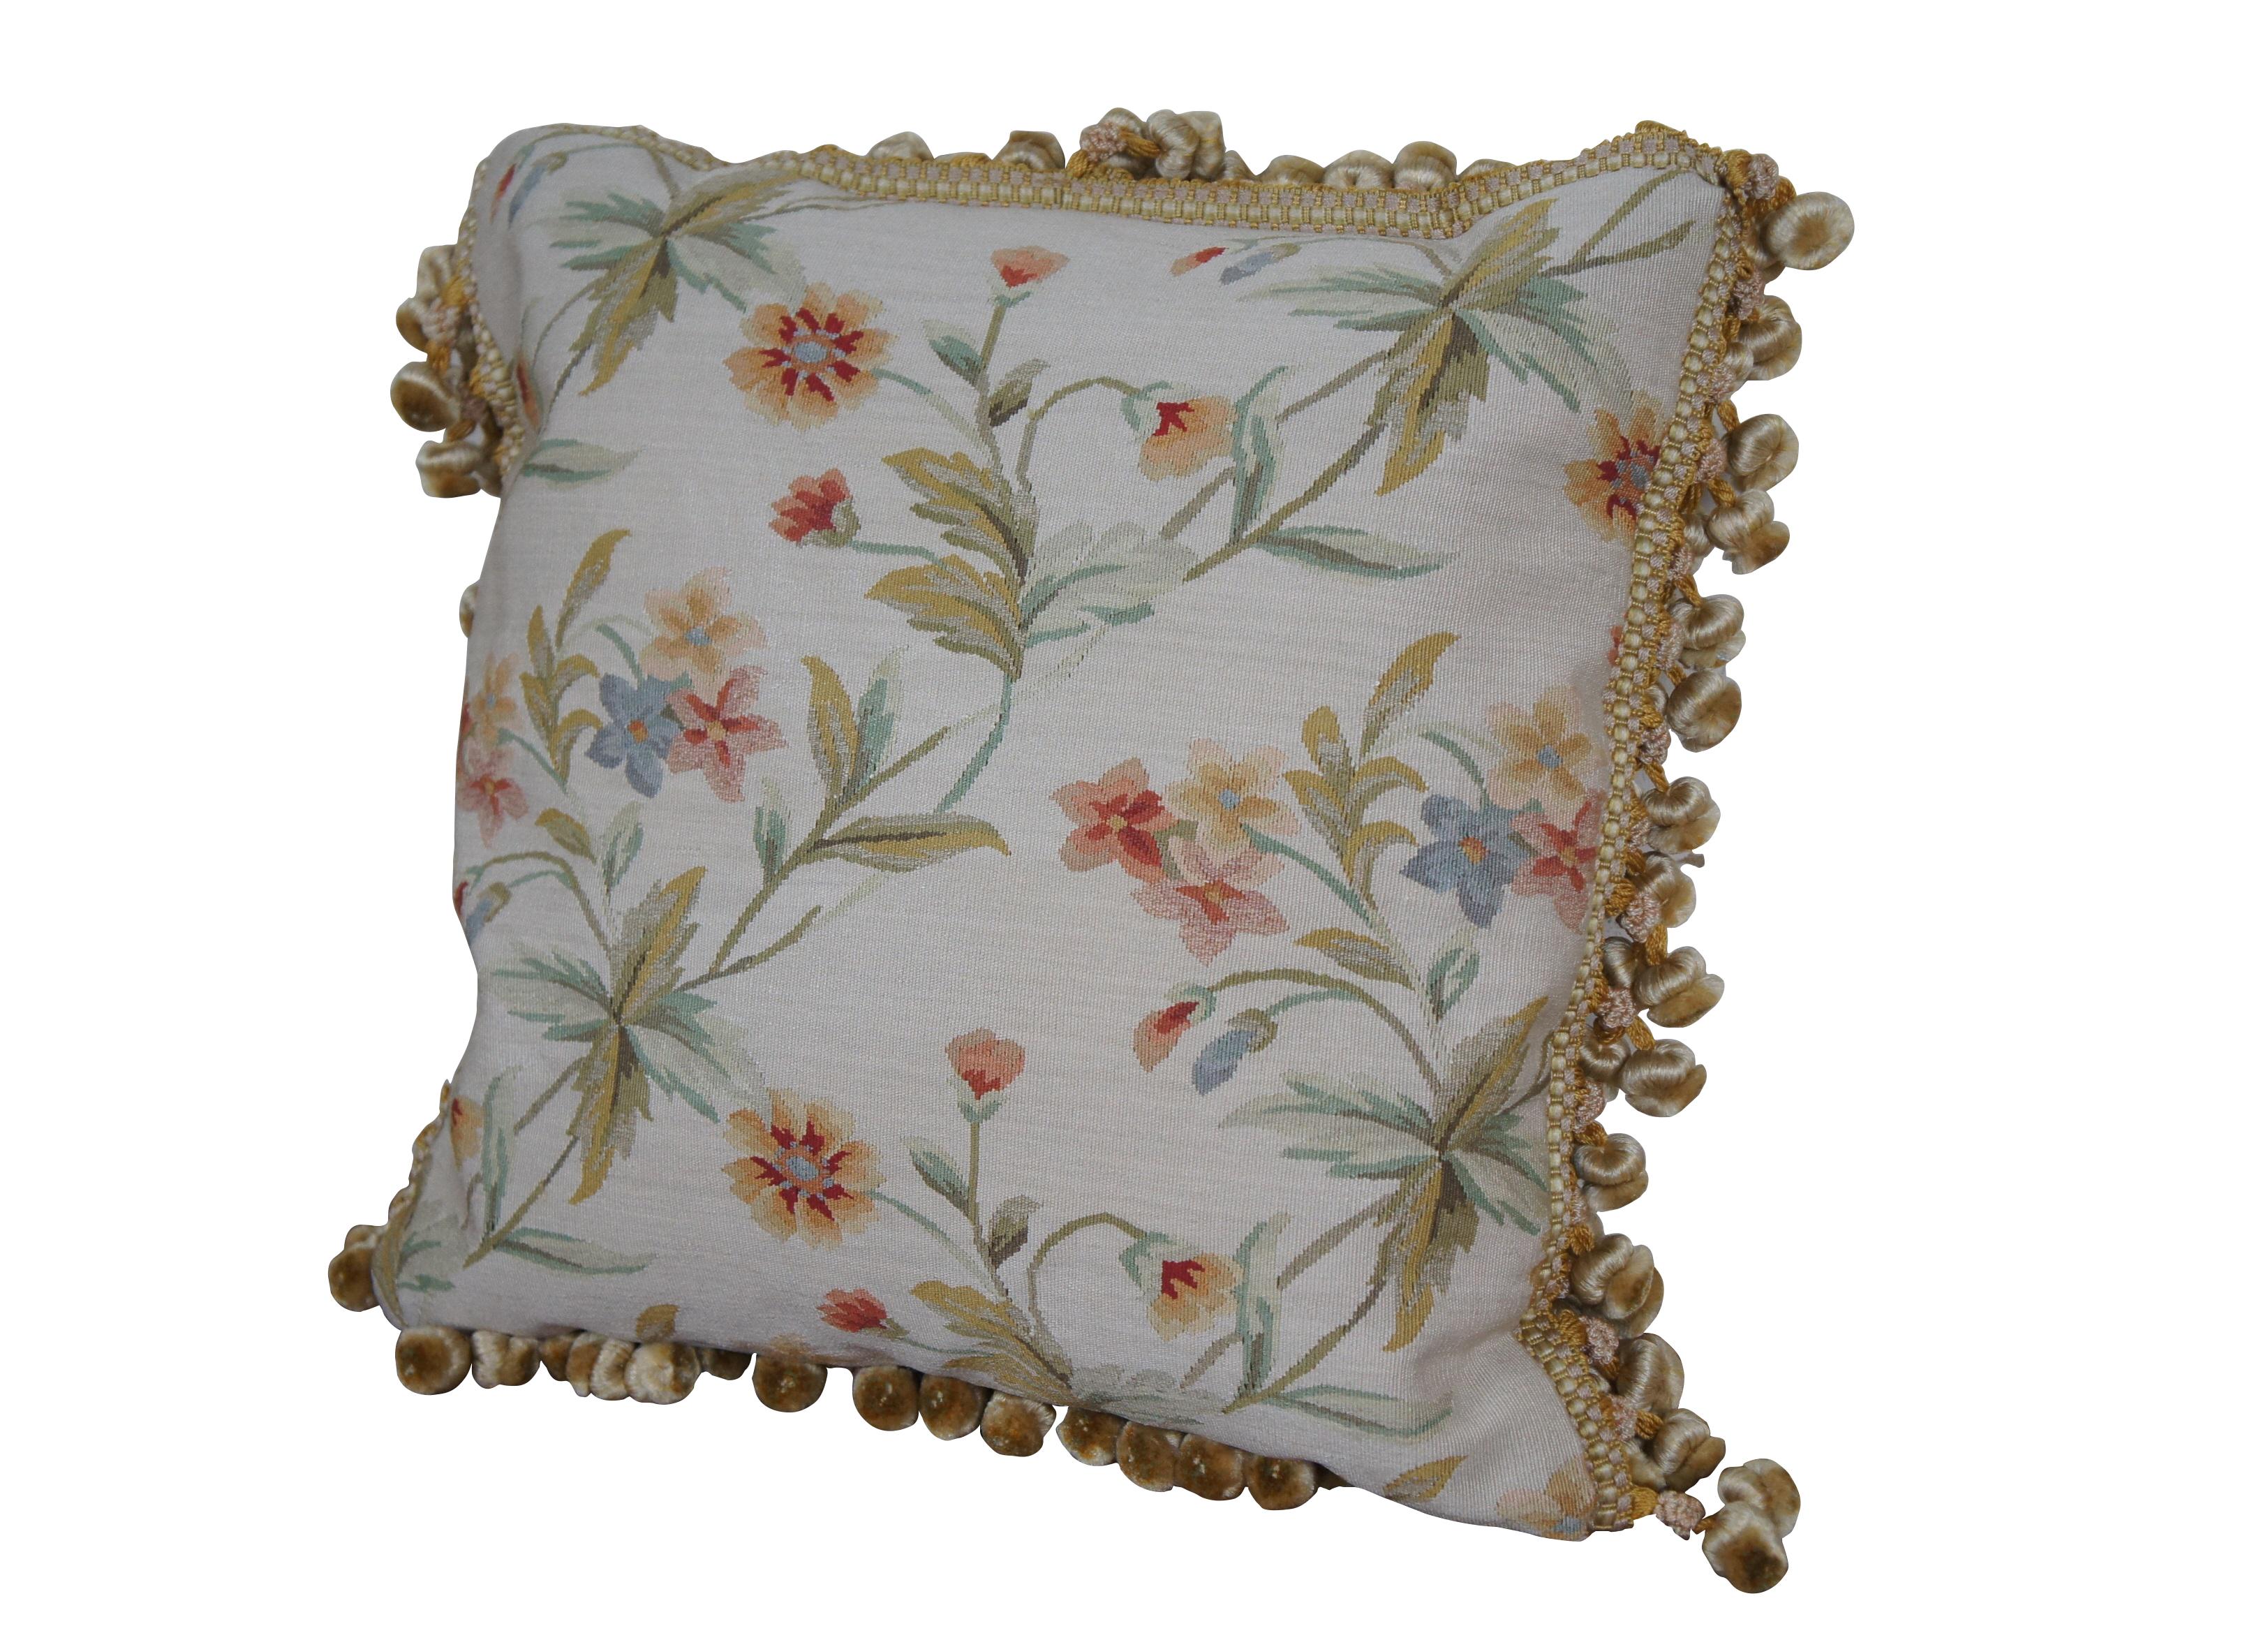 2 Available - 20th century square throw pillow, embroidered in silk with an array of cream, rusty pink, and blue flowers on green leafy stems. Gold and cream tassel trim. Light brown velour back with zipper closure. Down filled.

Dimensions:
16